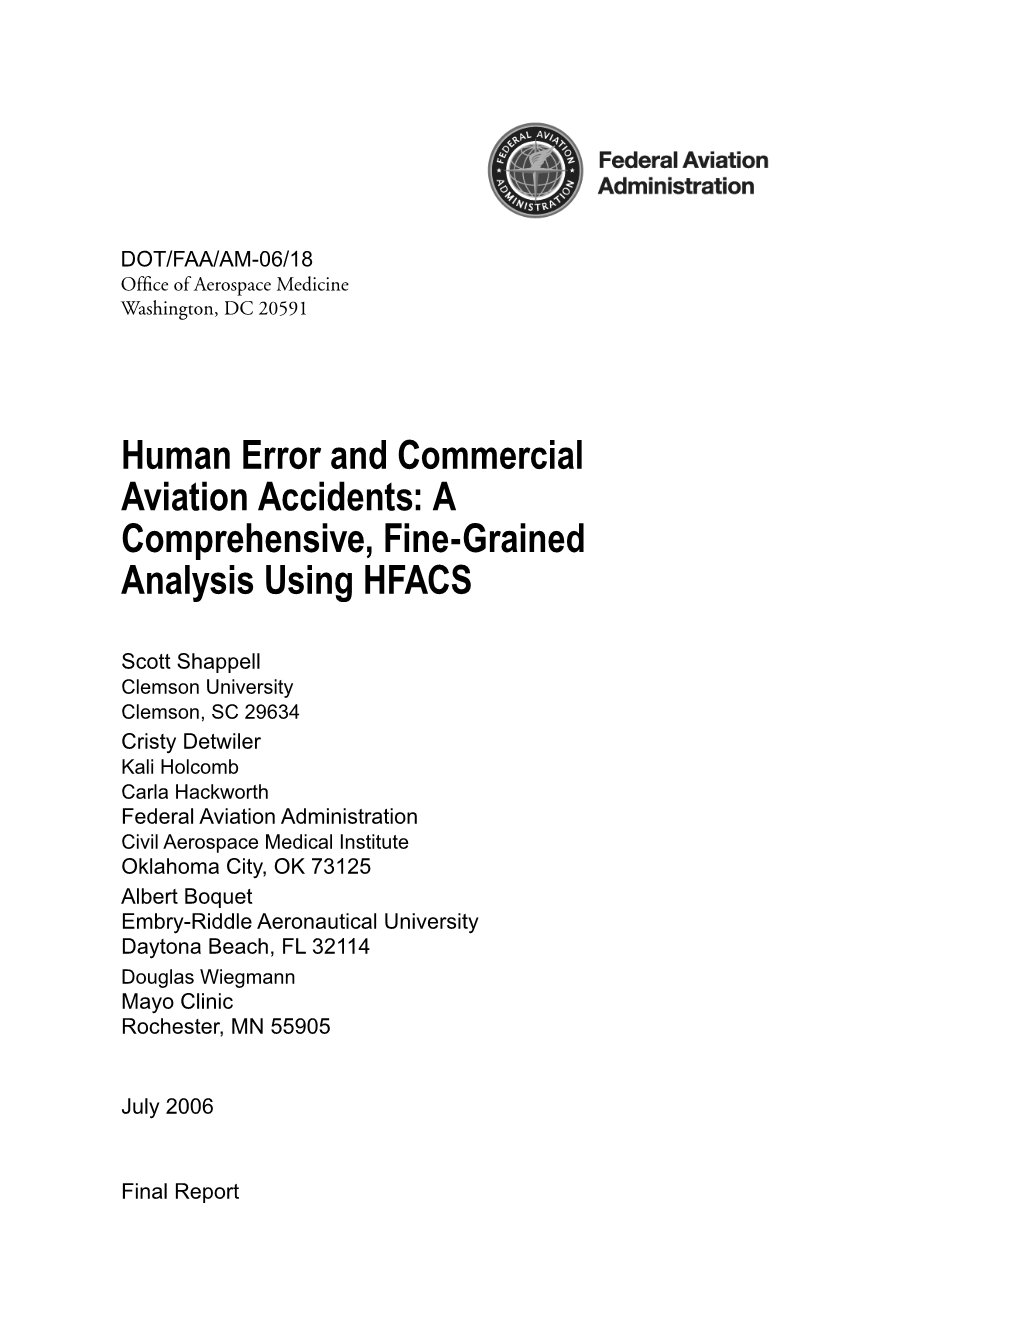 Human Error and Commercial Aviation Accidents: a Comprehensive, Fine-Grained Analysis Using HFACS